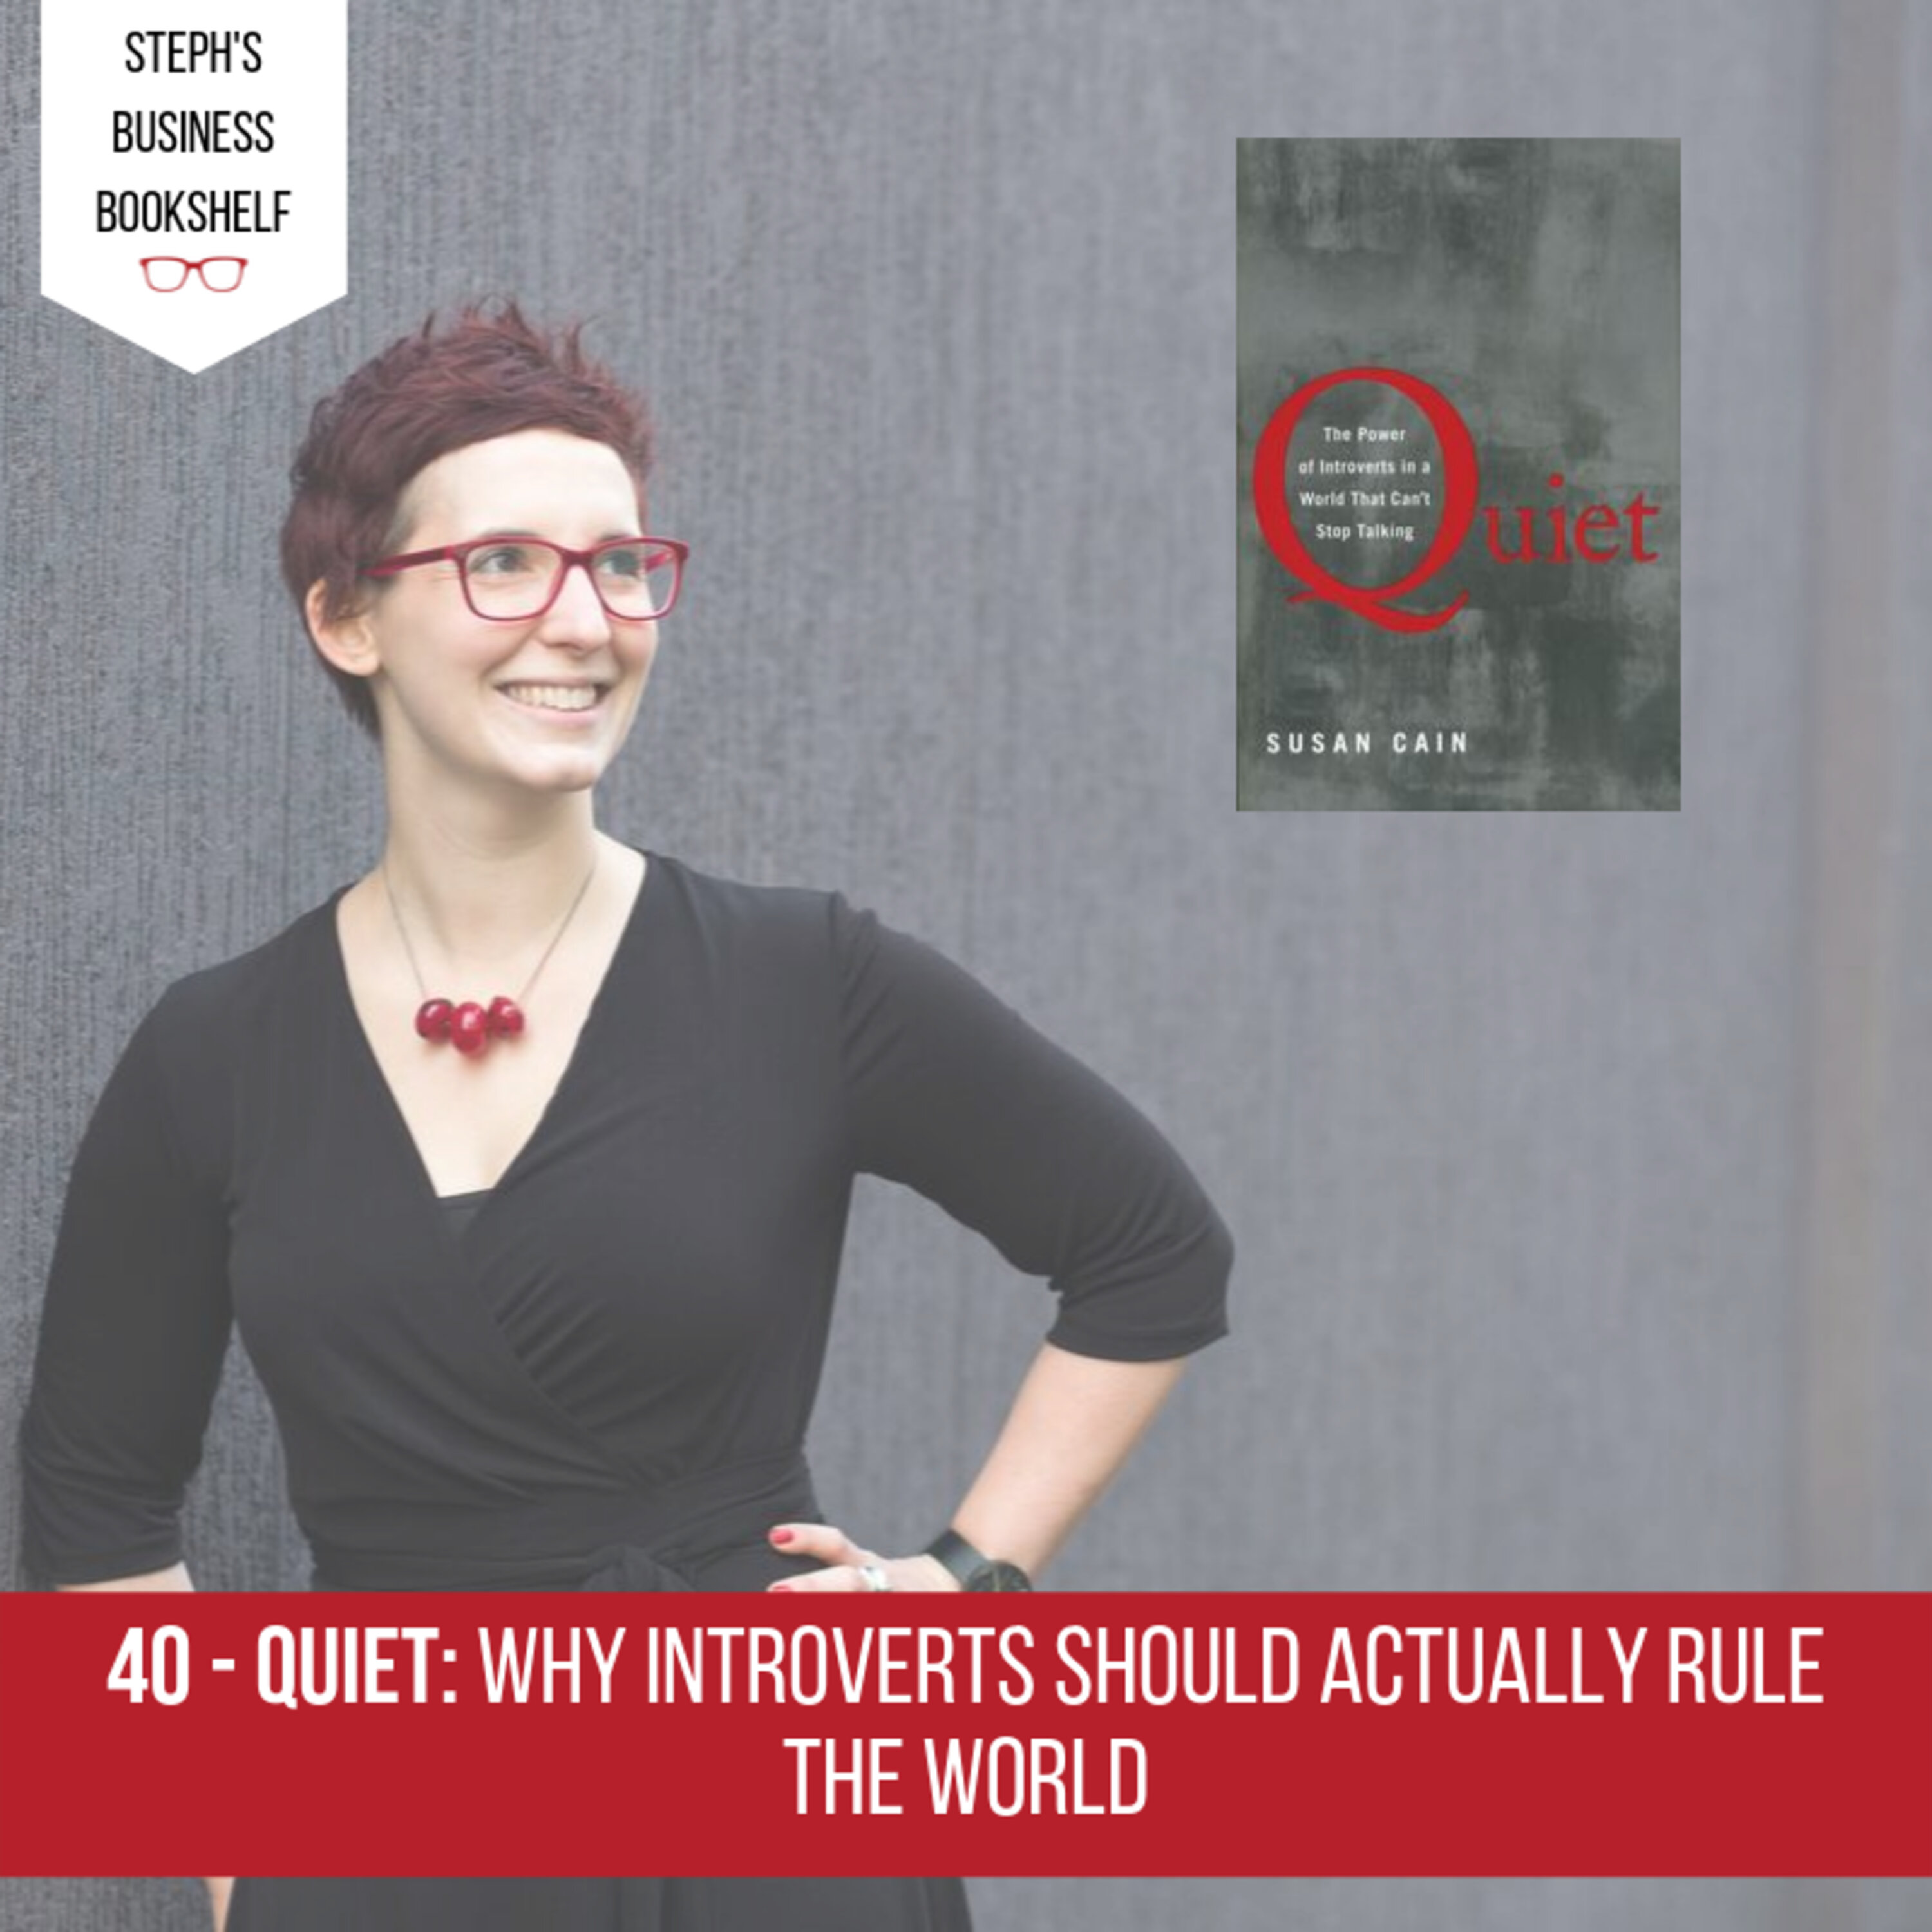 Quiet by Susan Cain: Why introverts should actually rule the world Image